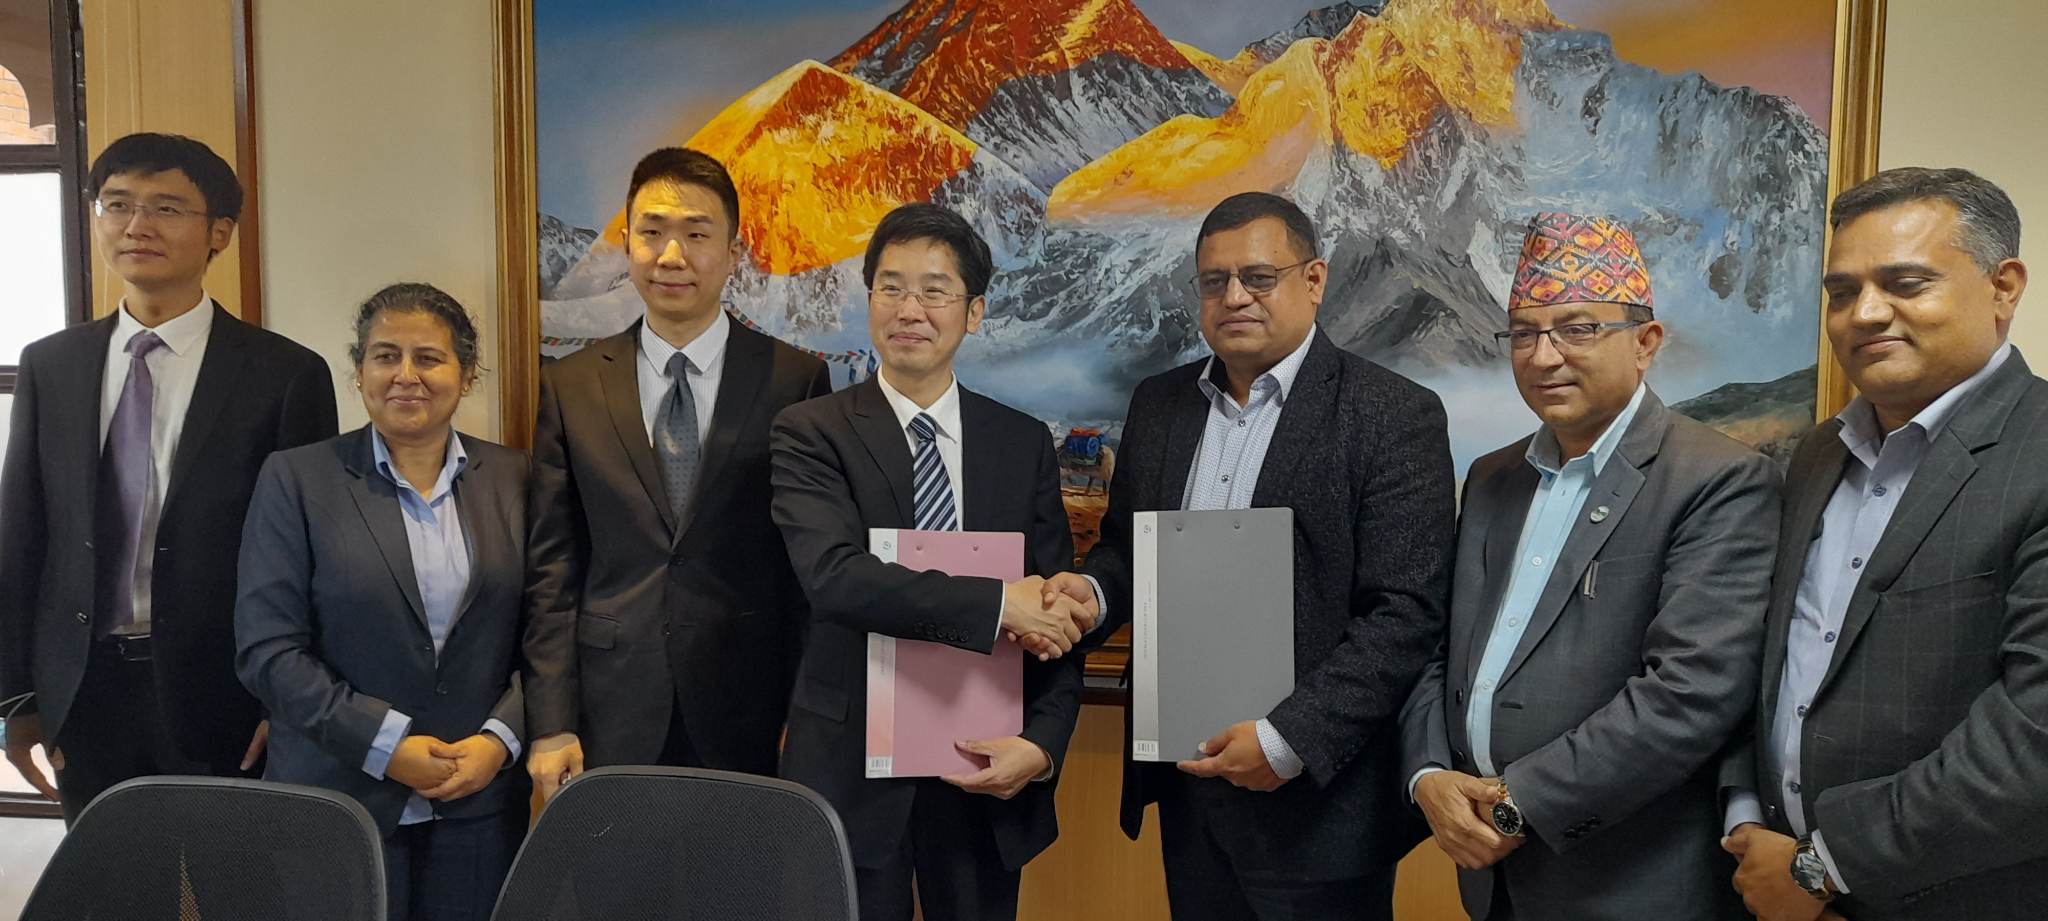 Nepal-China Friendship Dragon Boat Race Festival to be held for the first time in South Asia